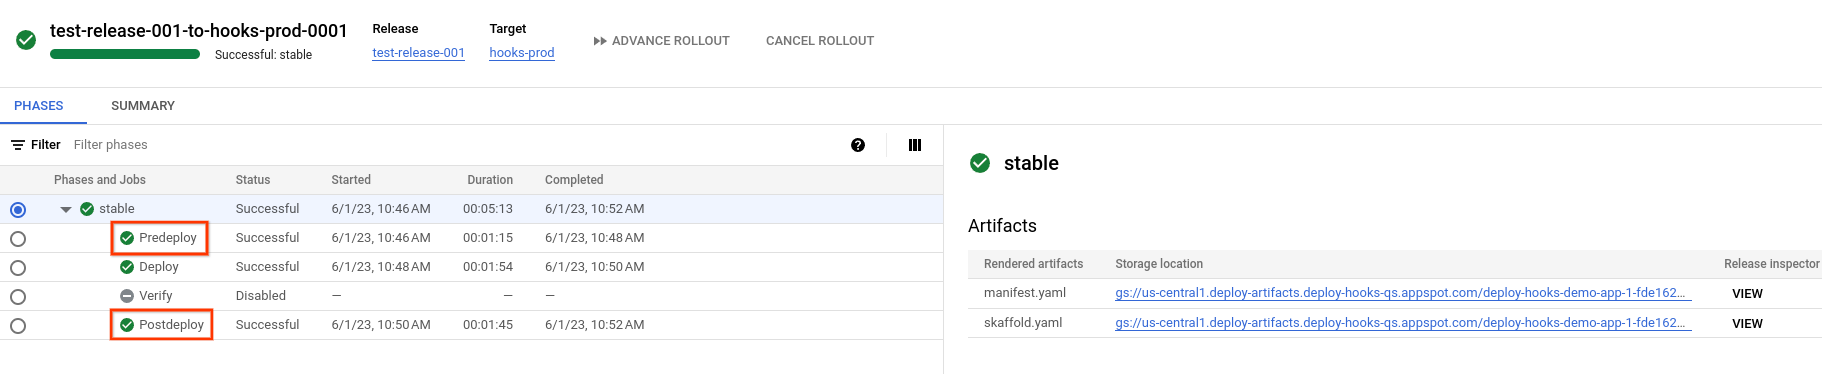 Roll-outs in der Google Cloud Console